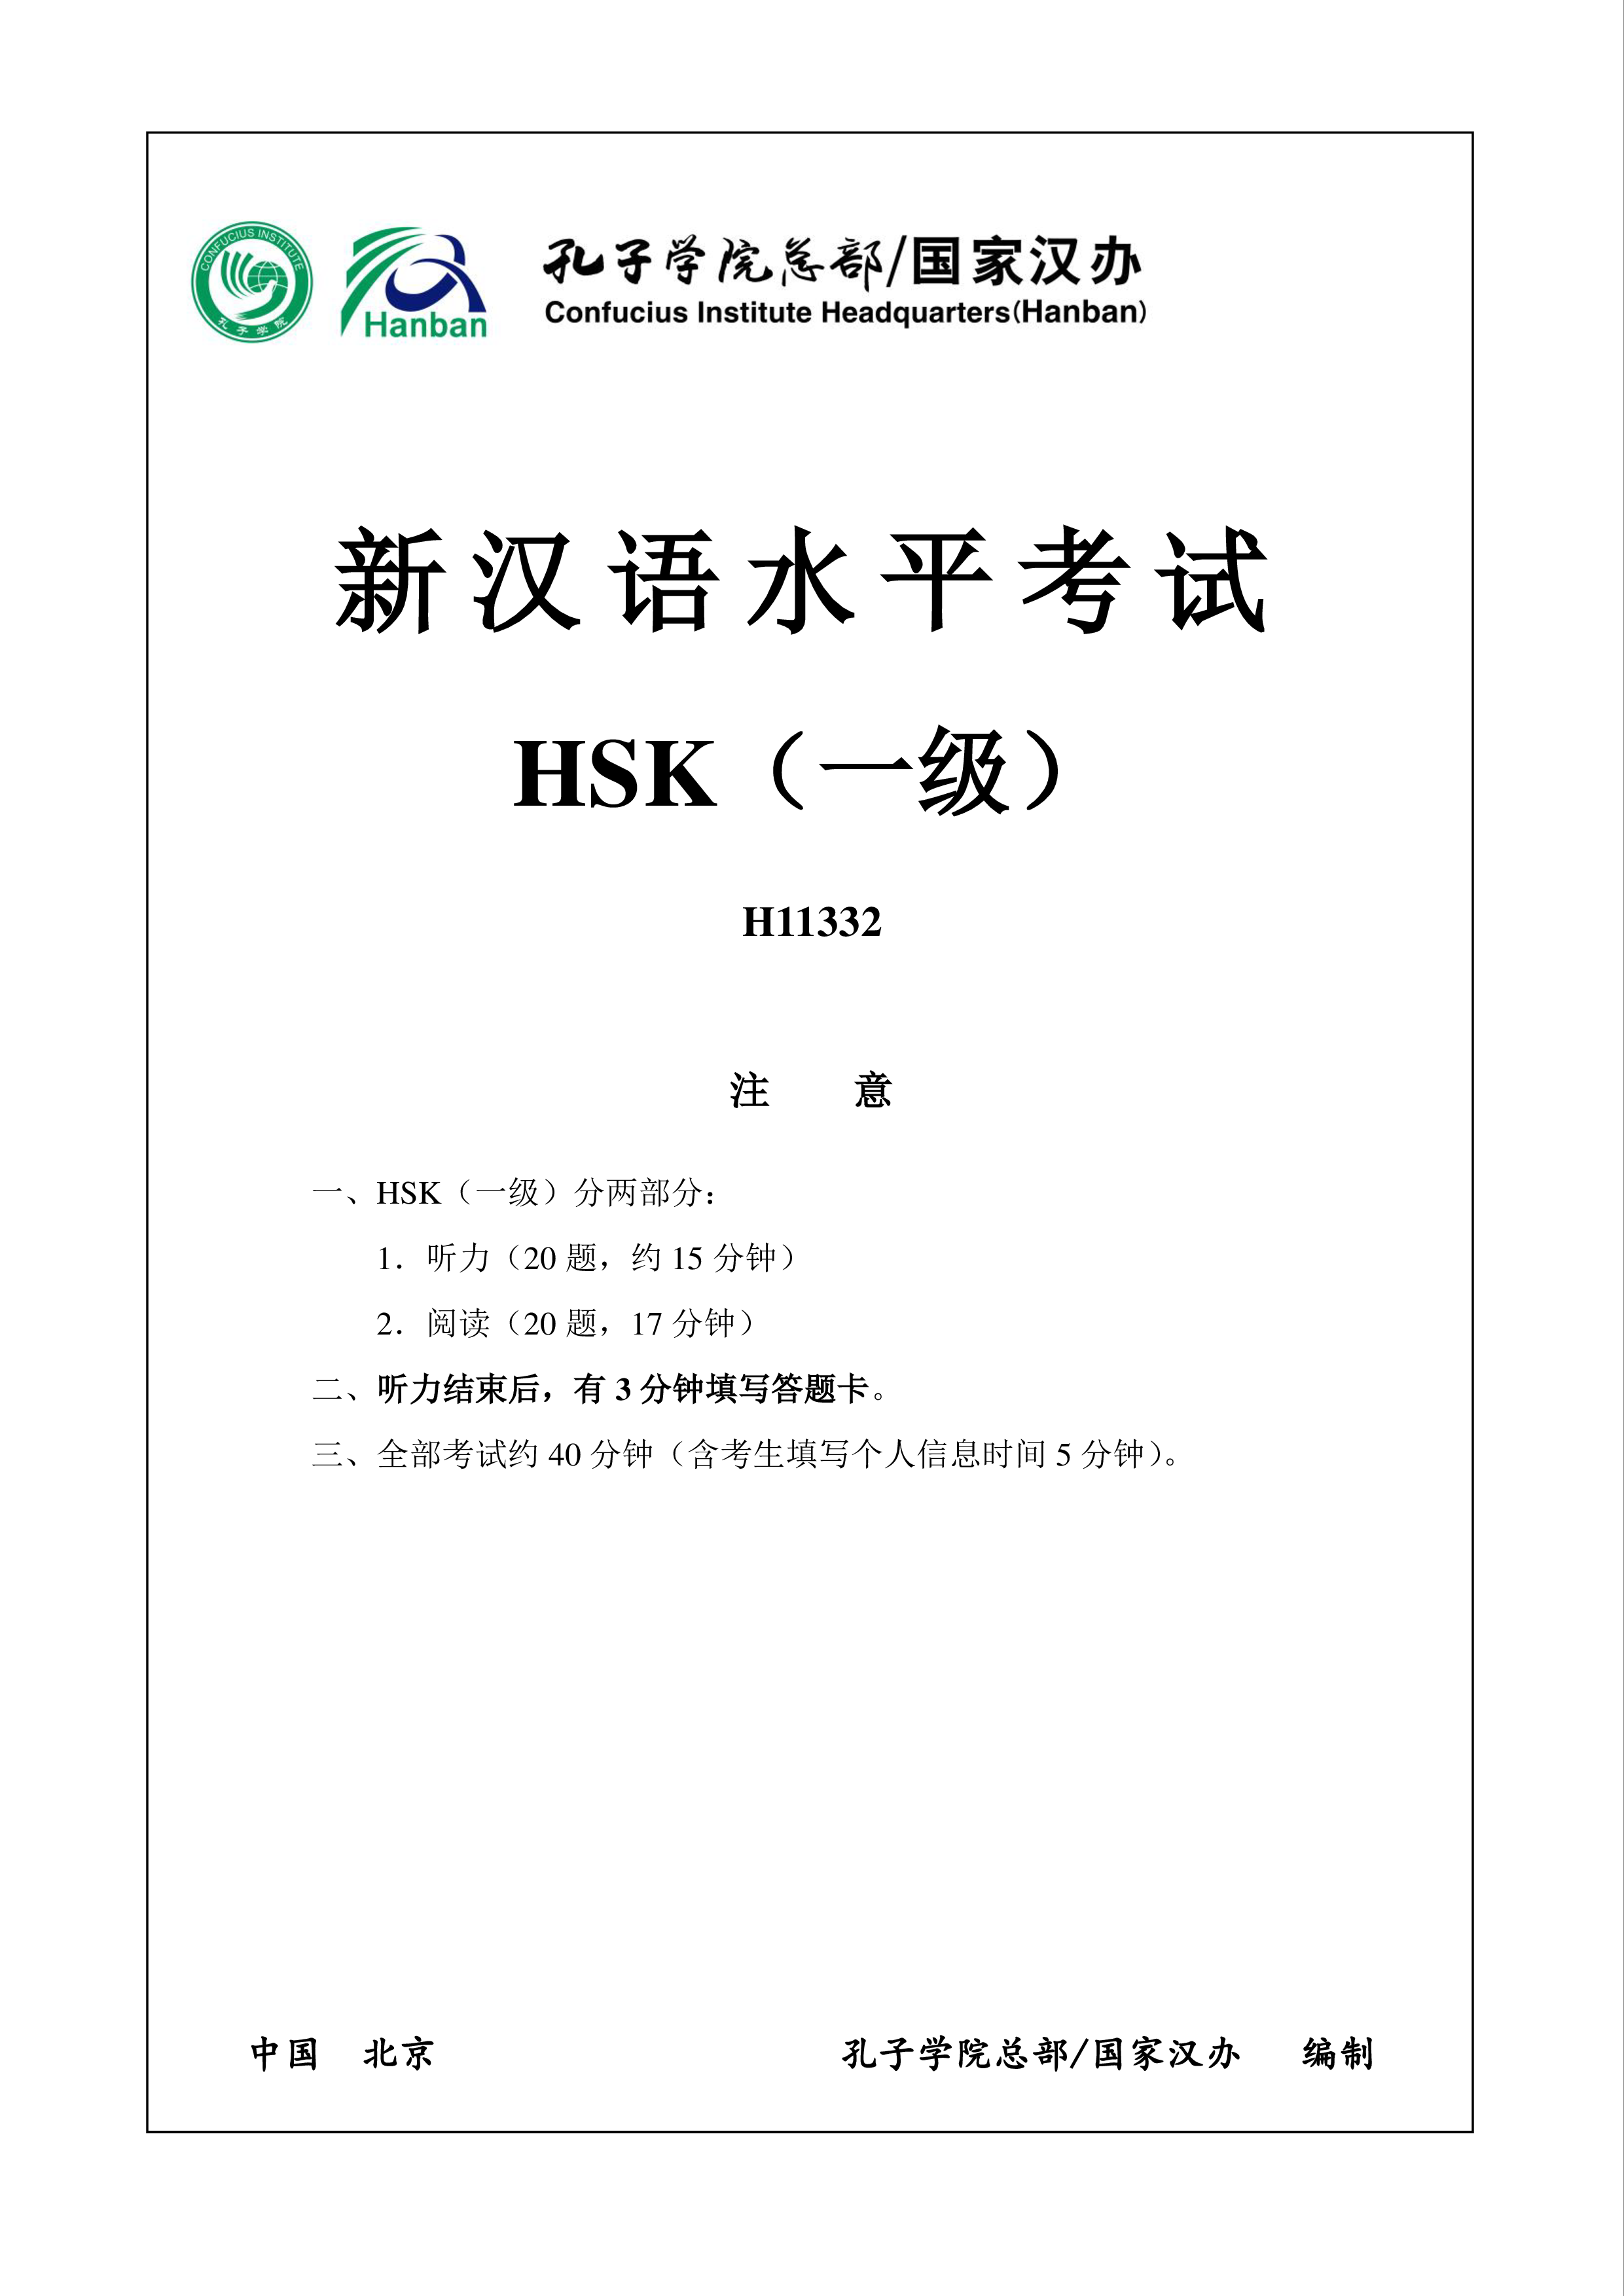 h11332 hsk1 chinese exam including answers plantilla imagen principal